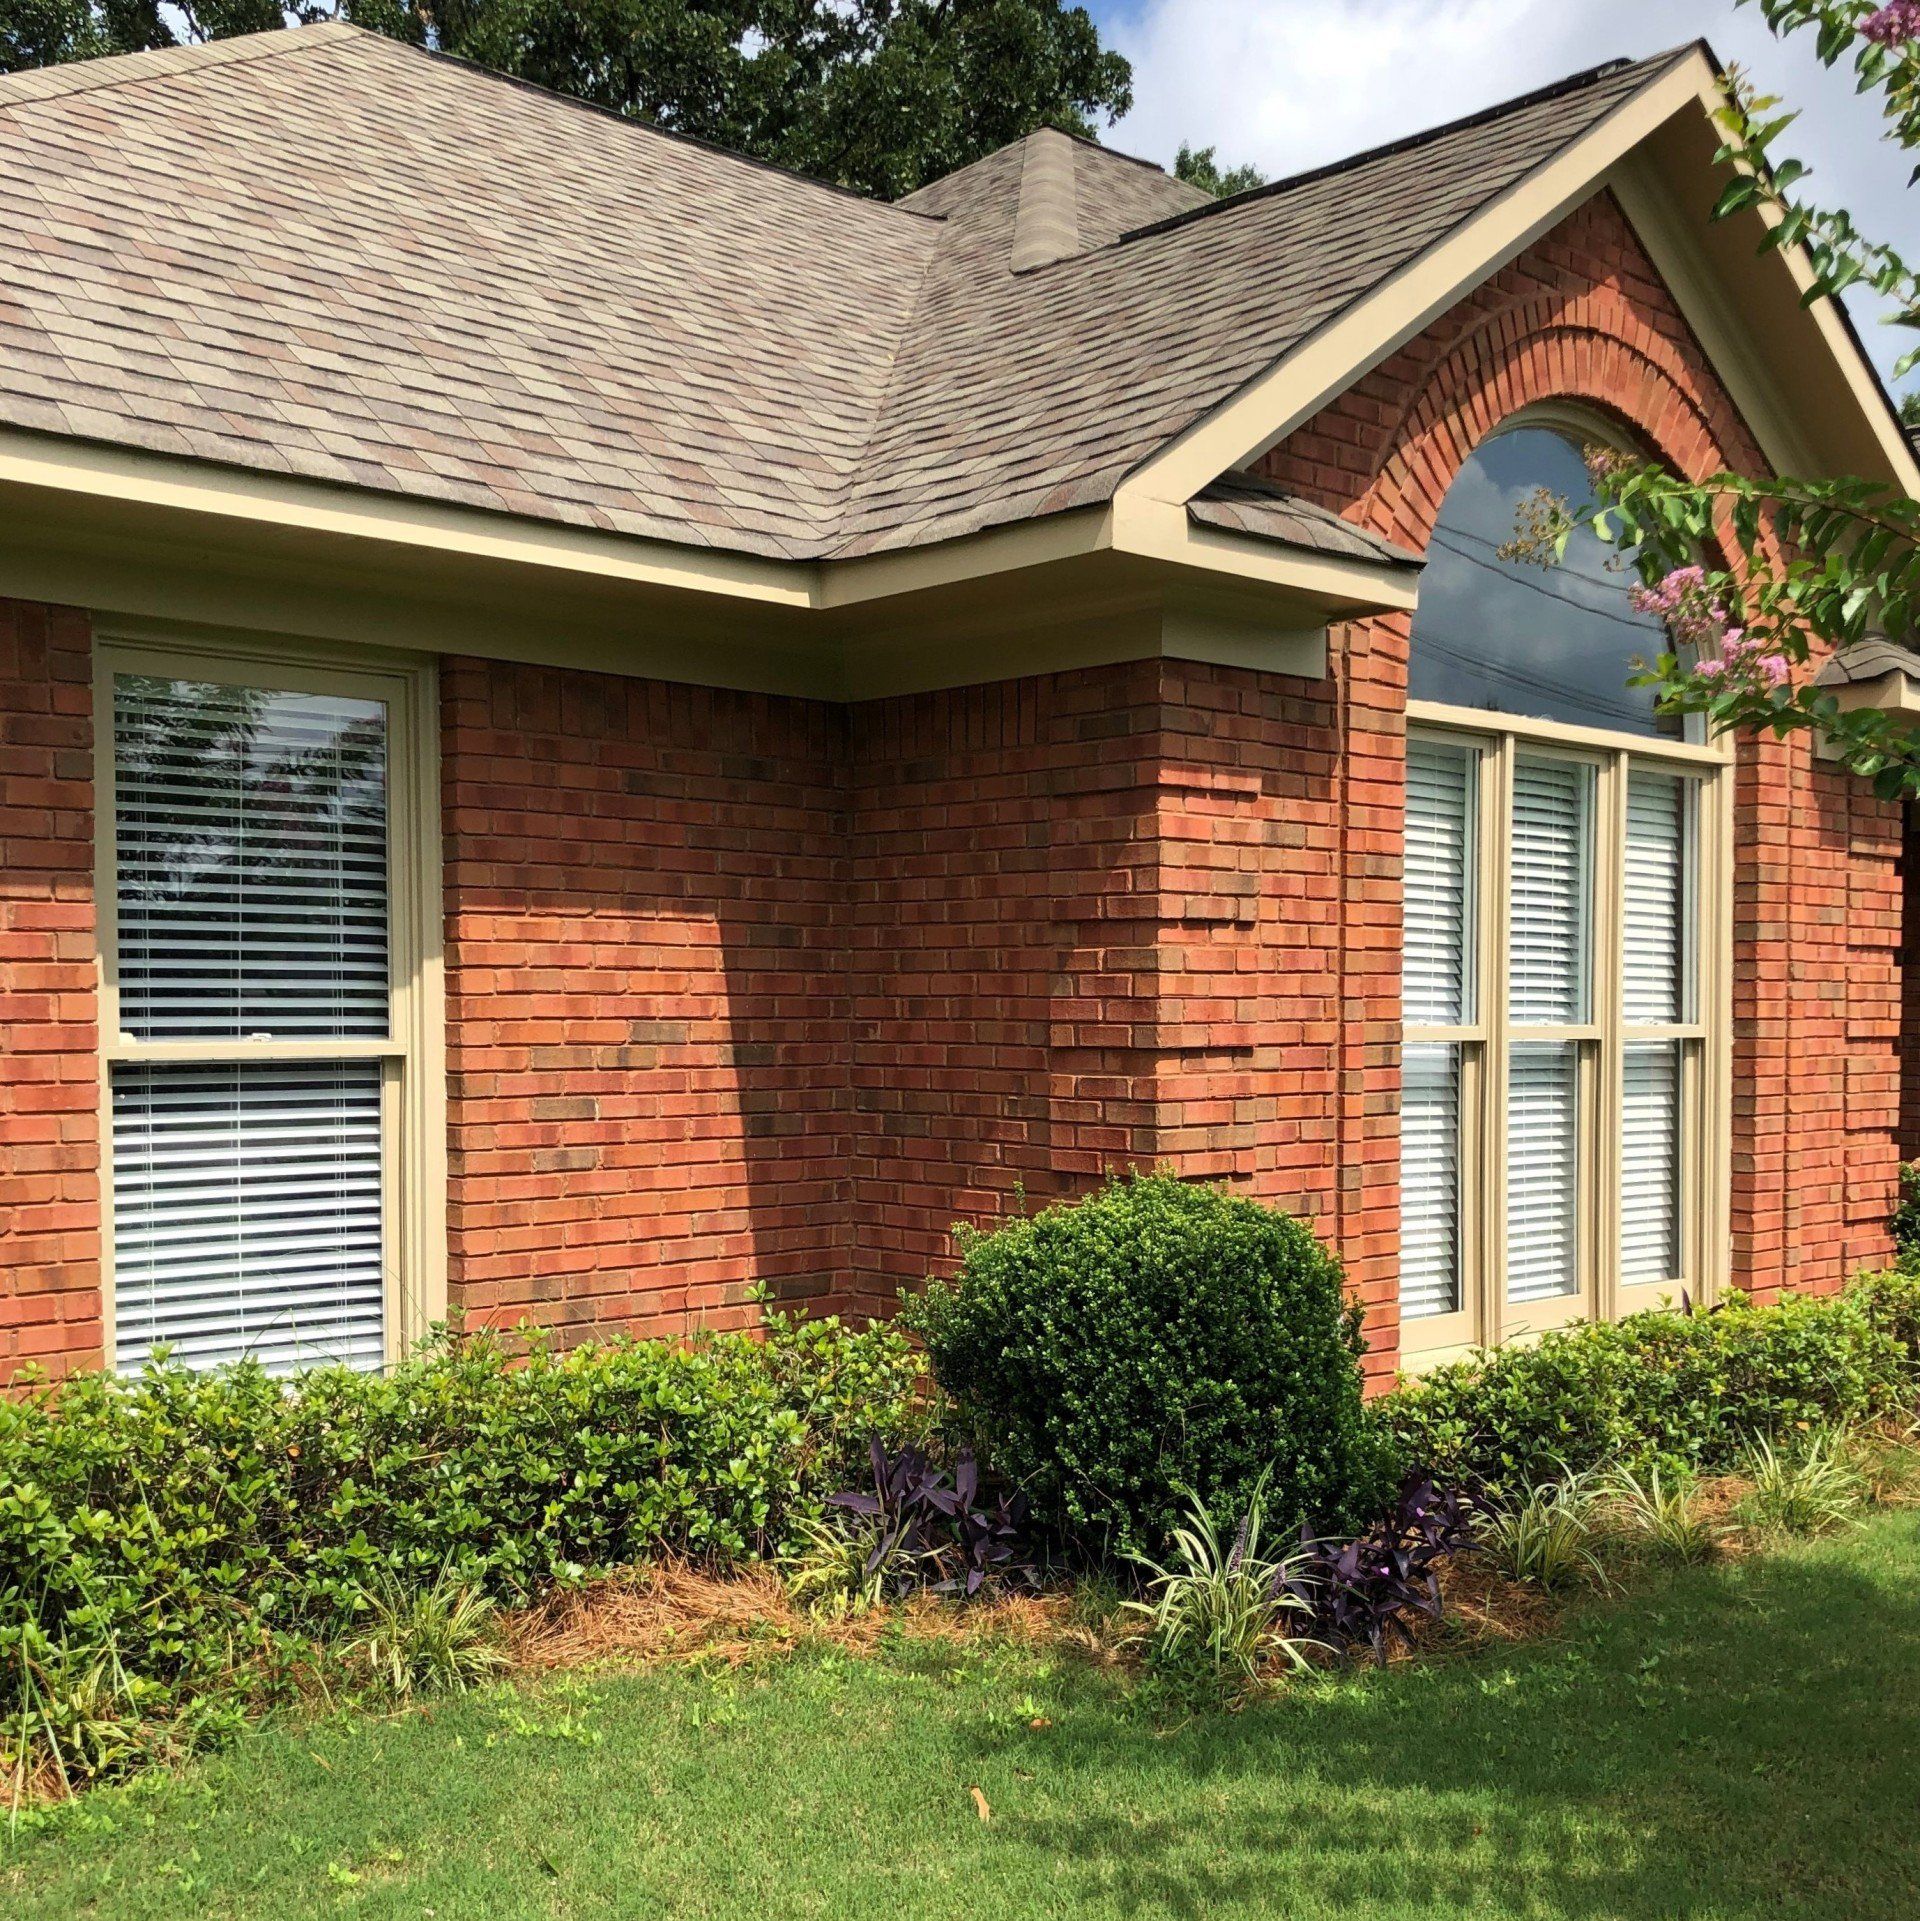 Tint home windows - Top-Performing SPF Residential Tint was needed to block heat from searing the interior of this Phenix City home in east Alabama